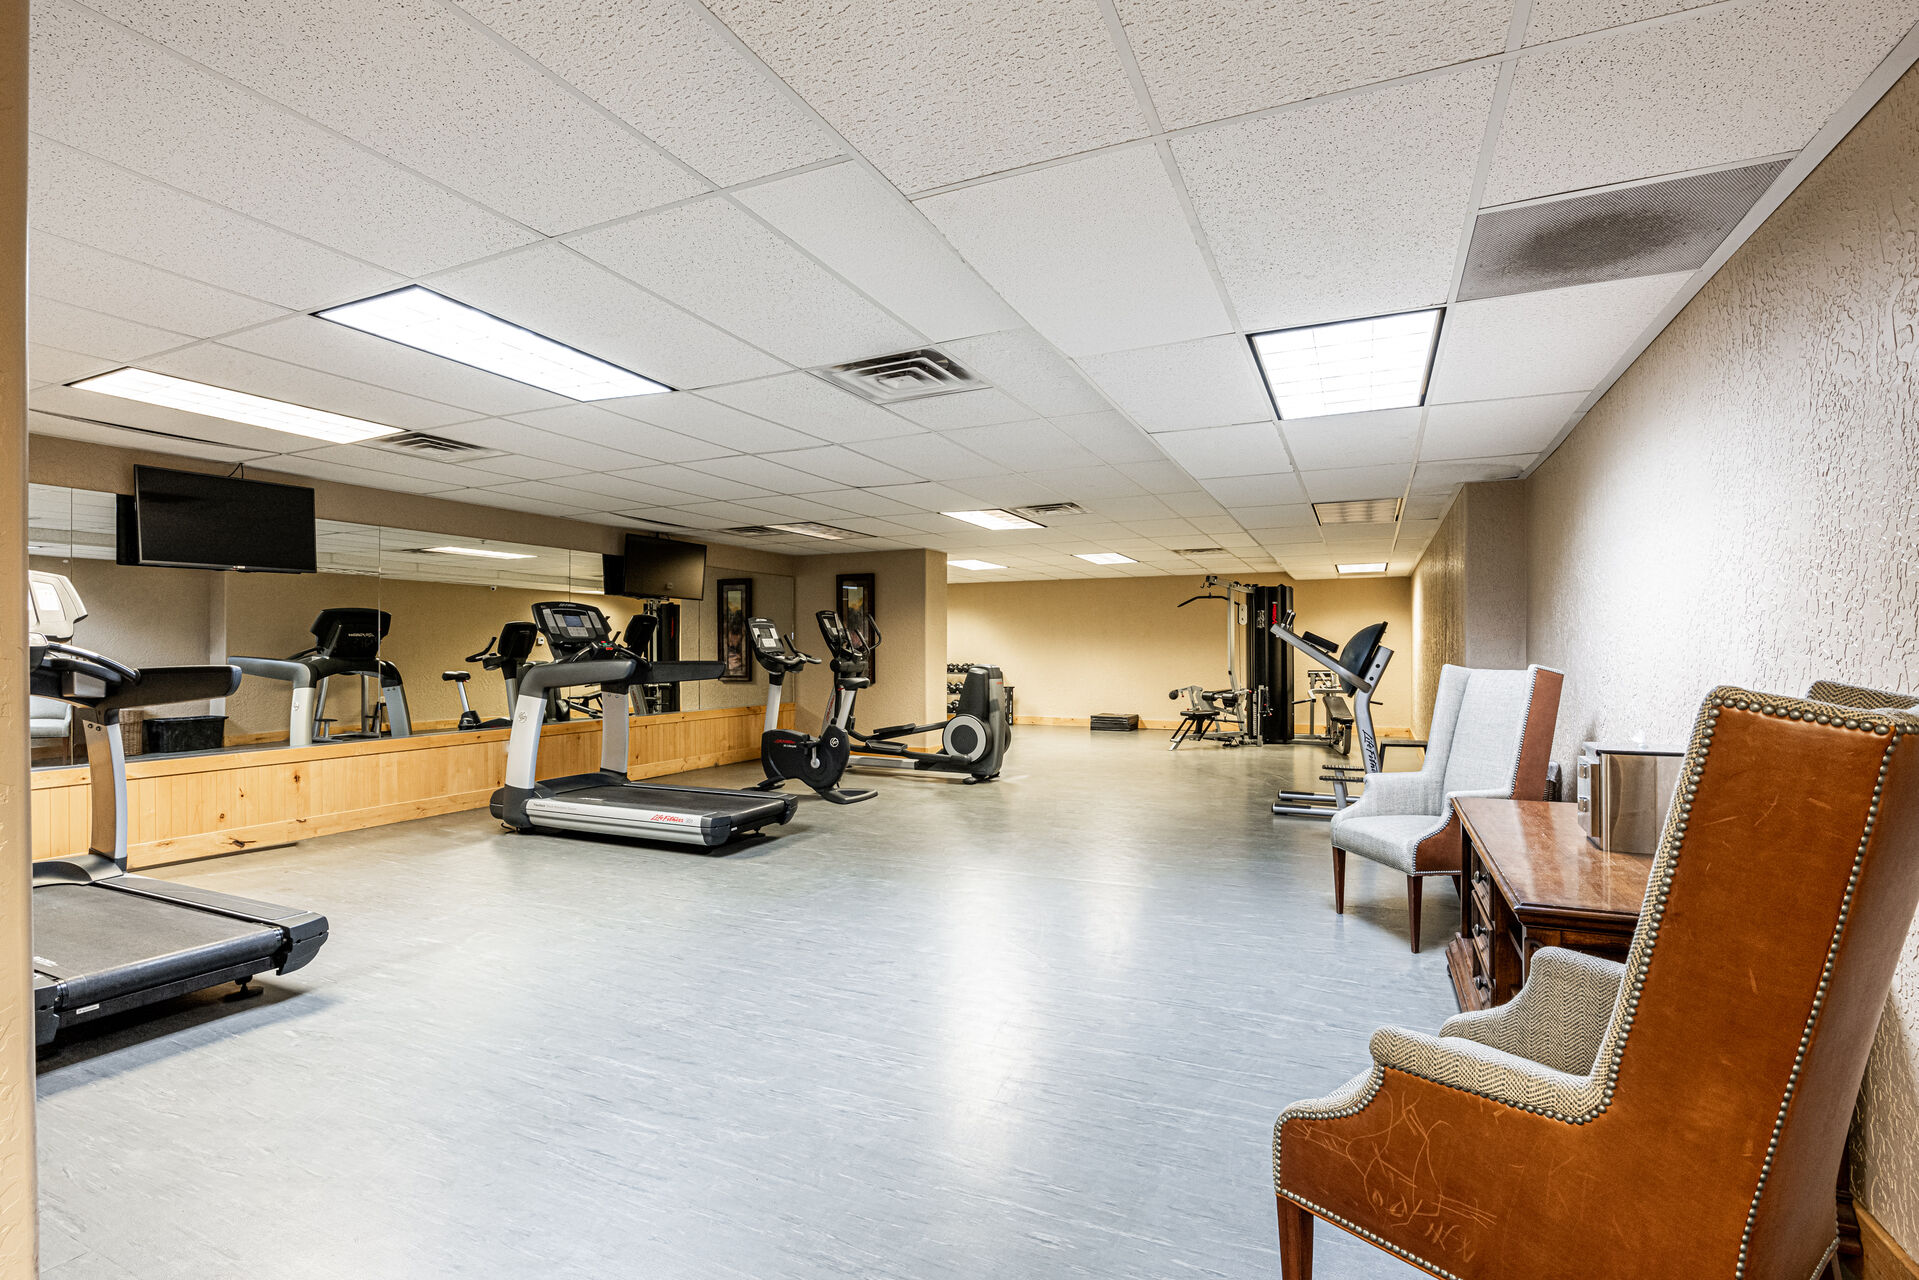 Work out in the Silverado Lodge community fitness center